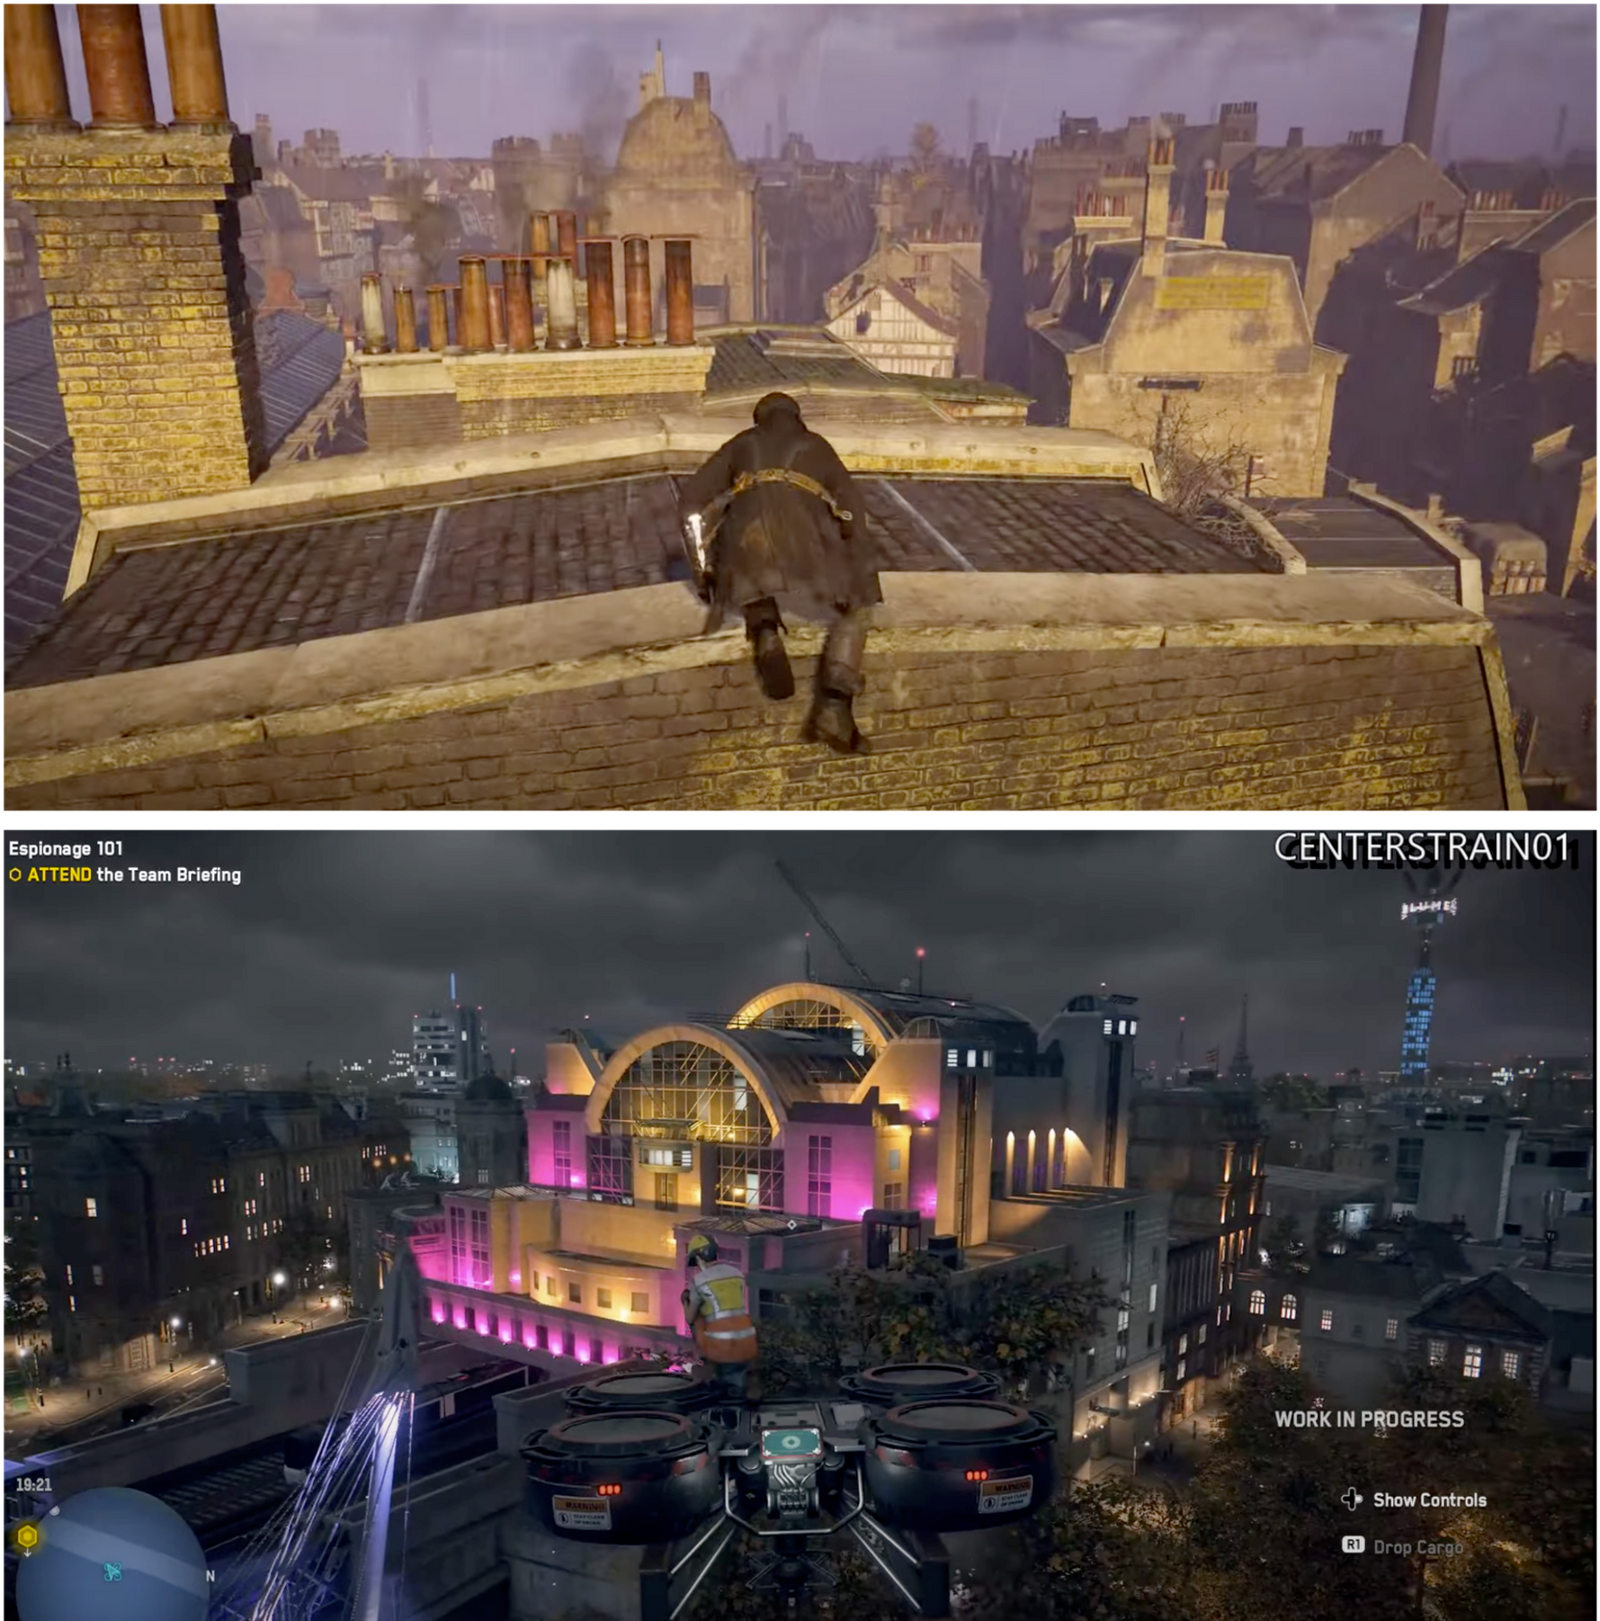 Collage of 2 images showing video game characters navigating London's cityscape